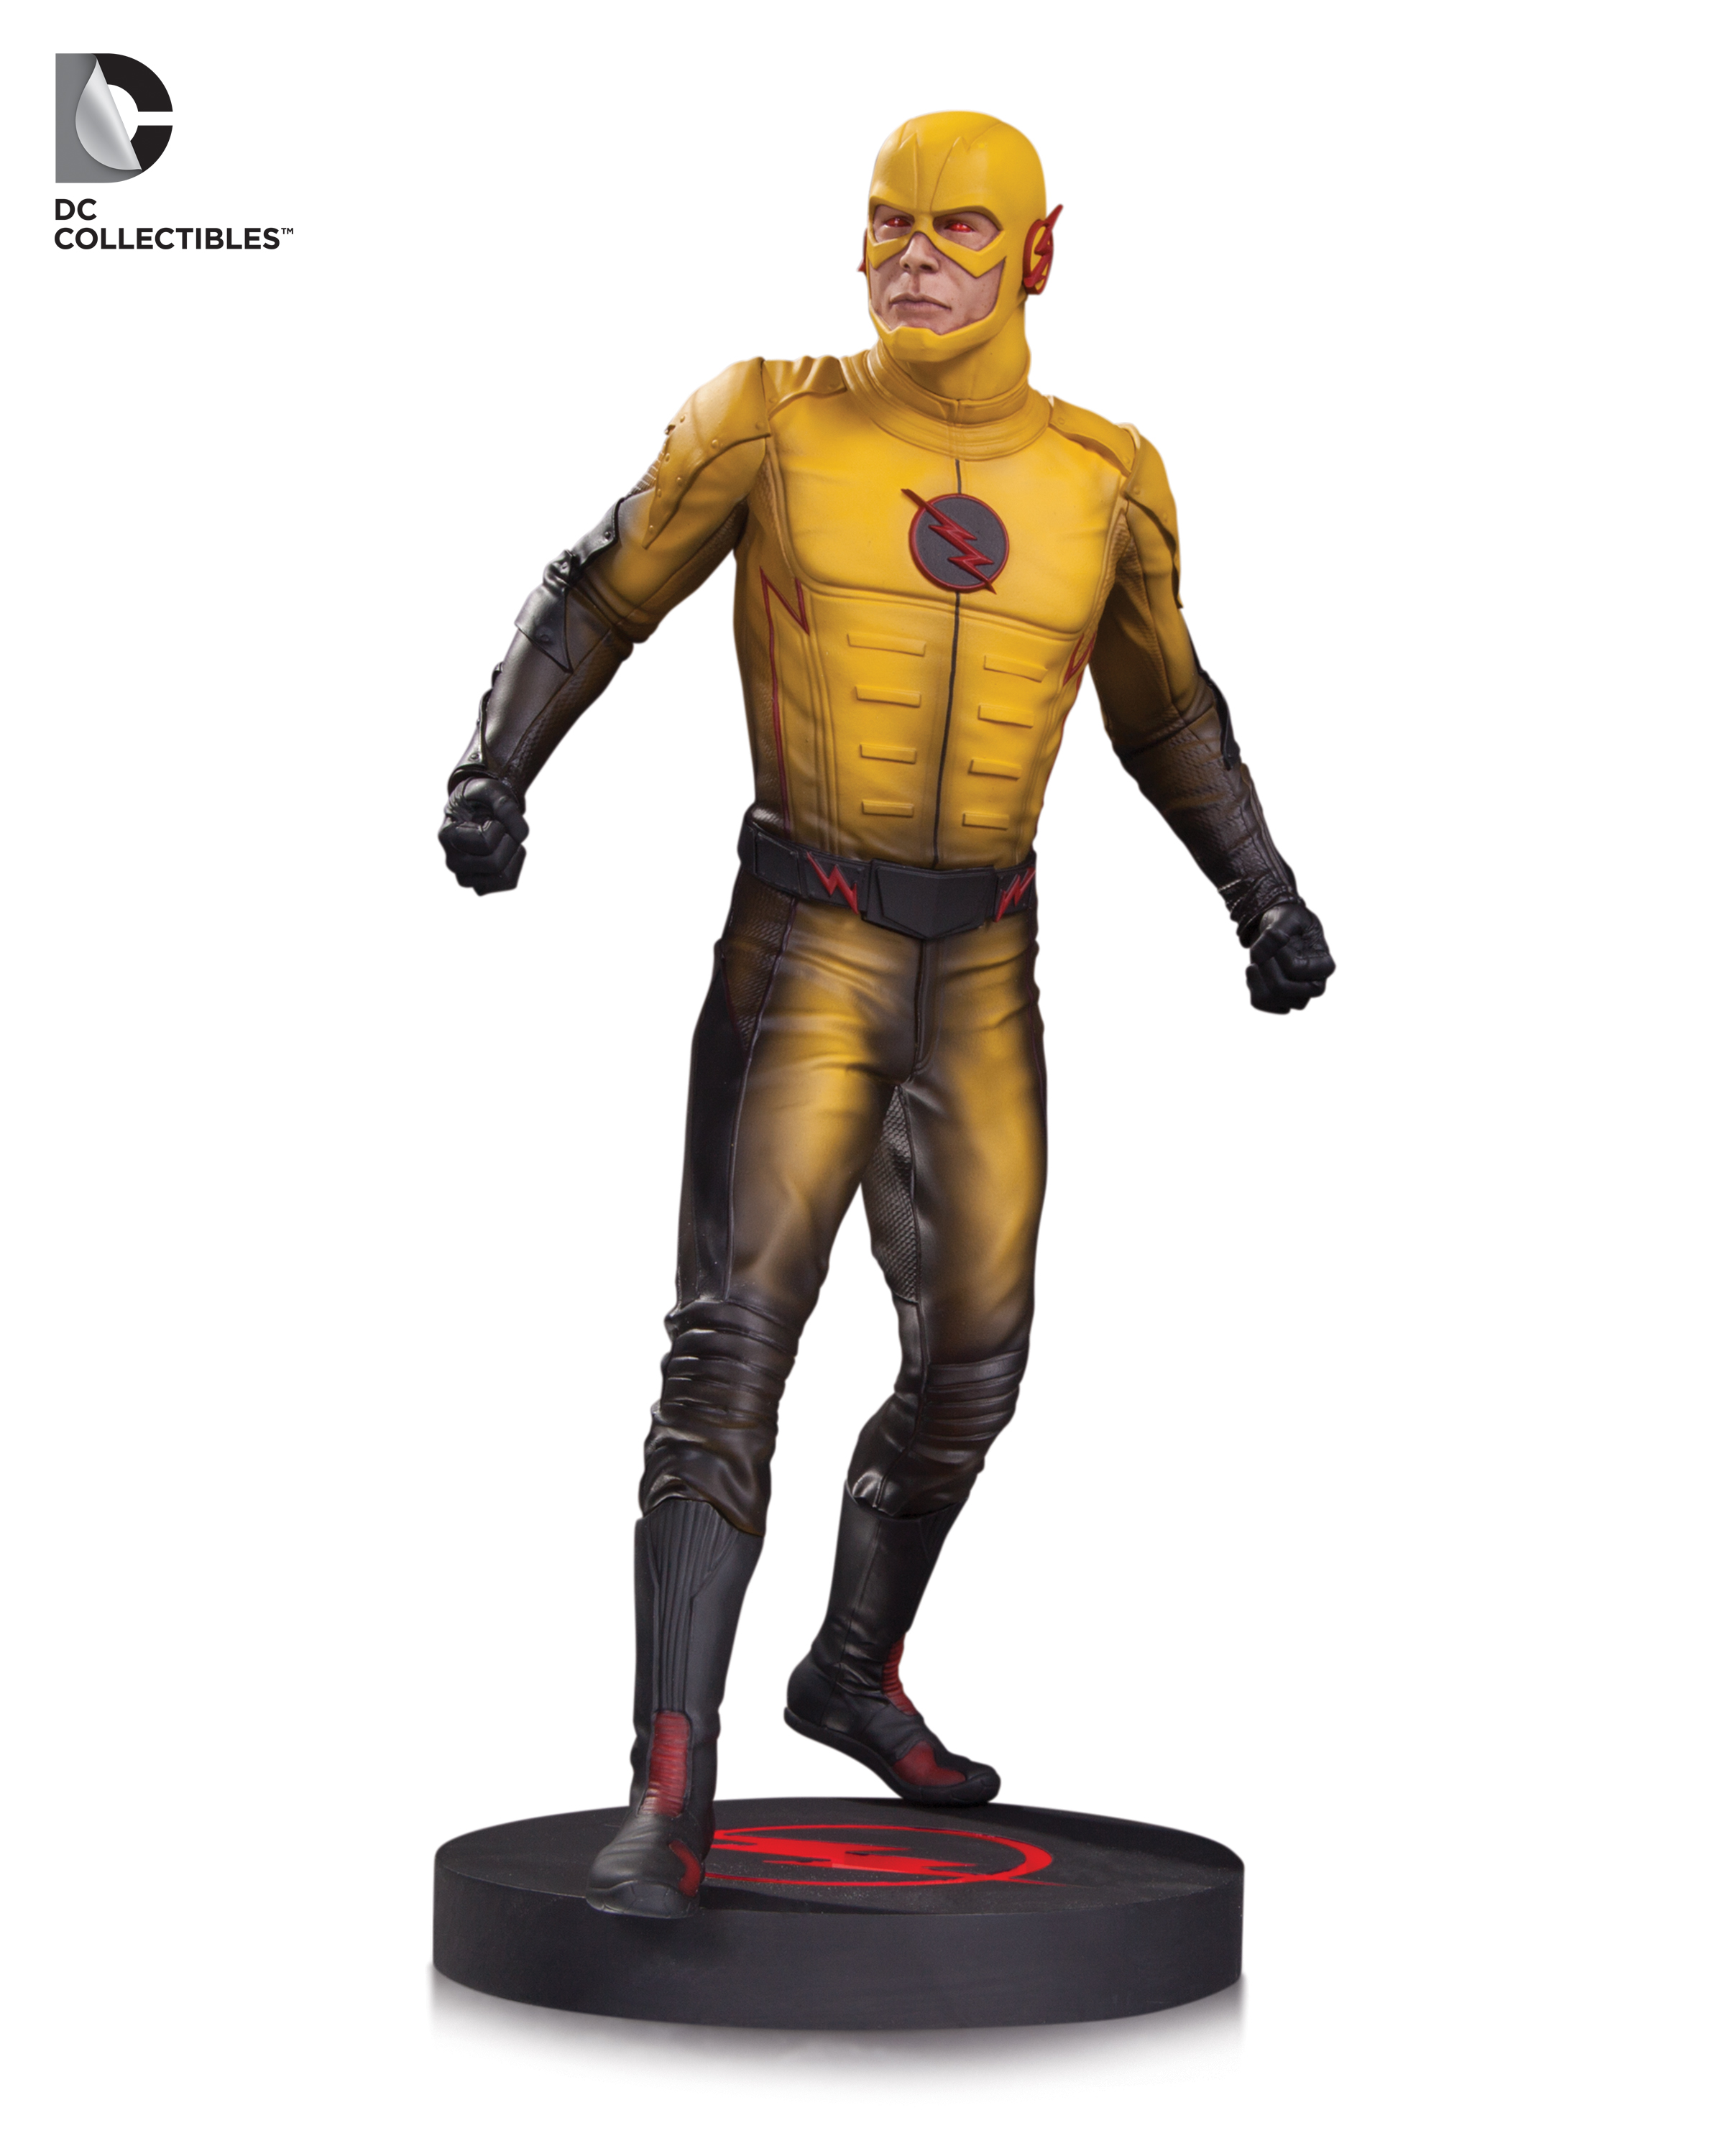 DC-Collectibles-Reverse-Flash-Statue.jpg